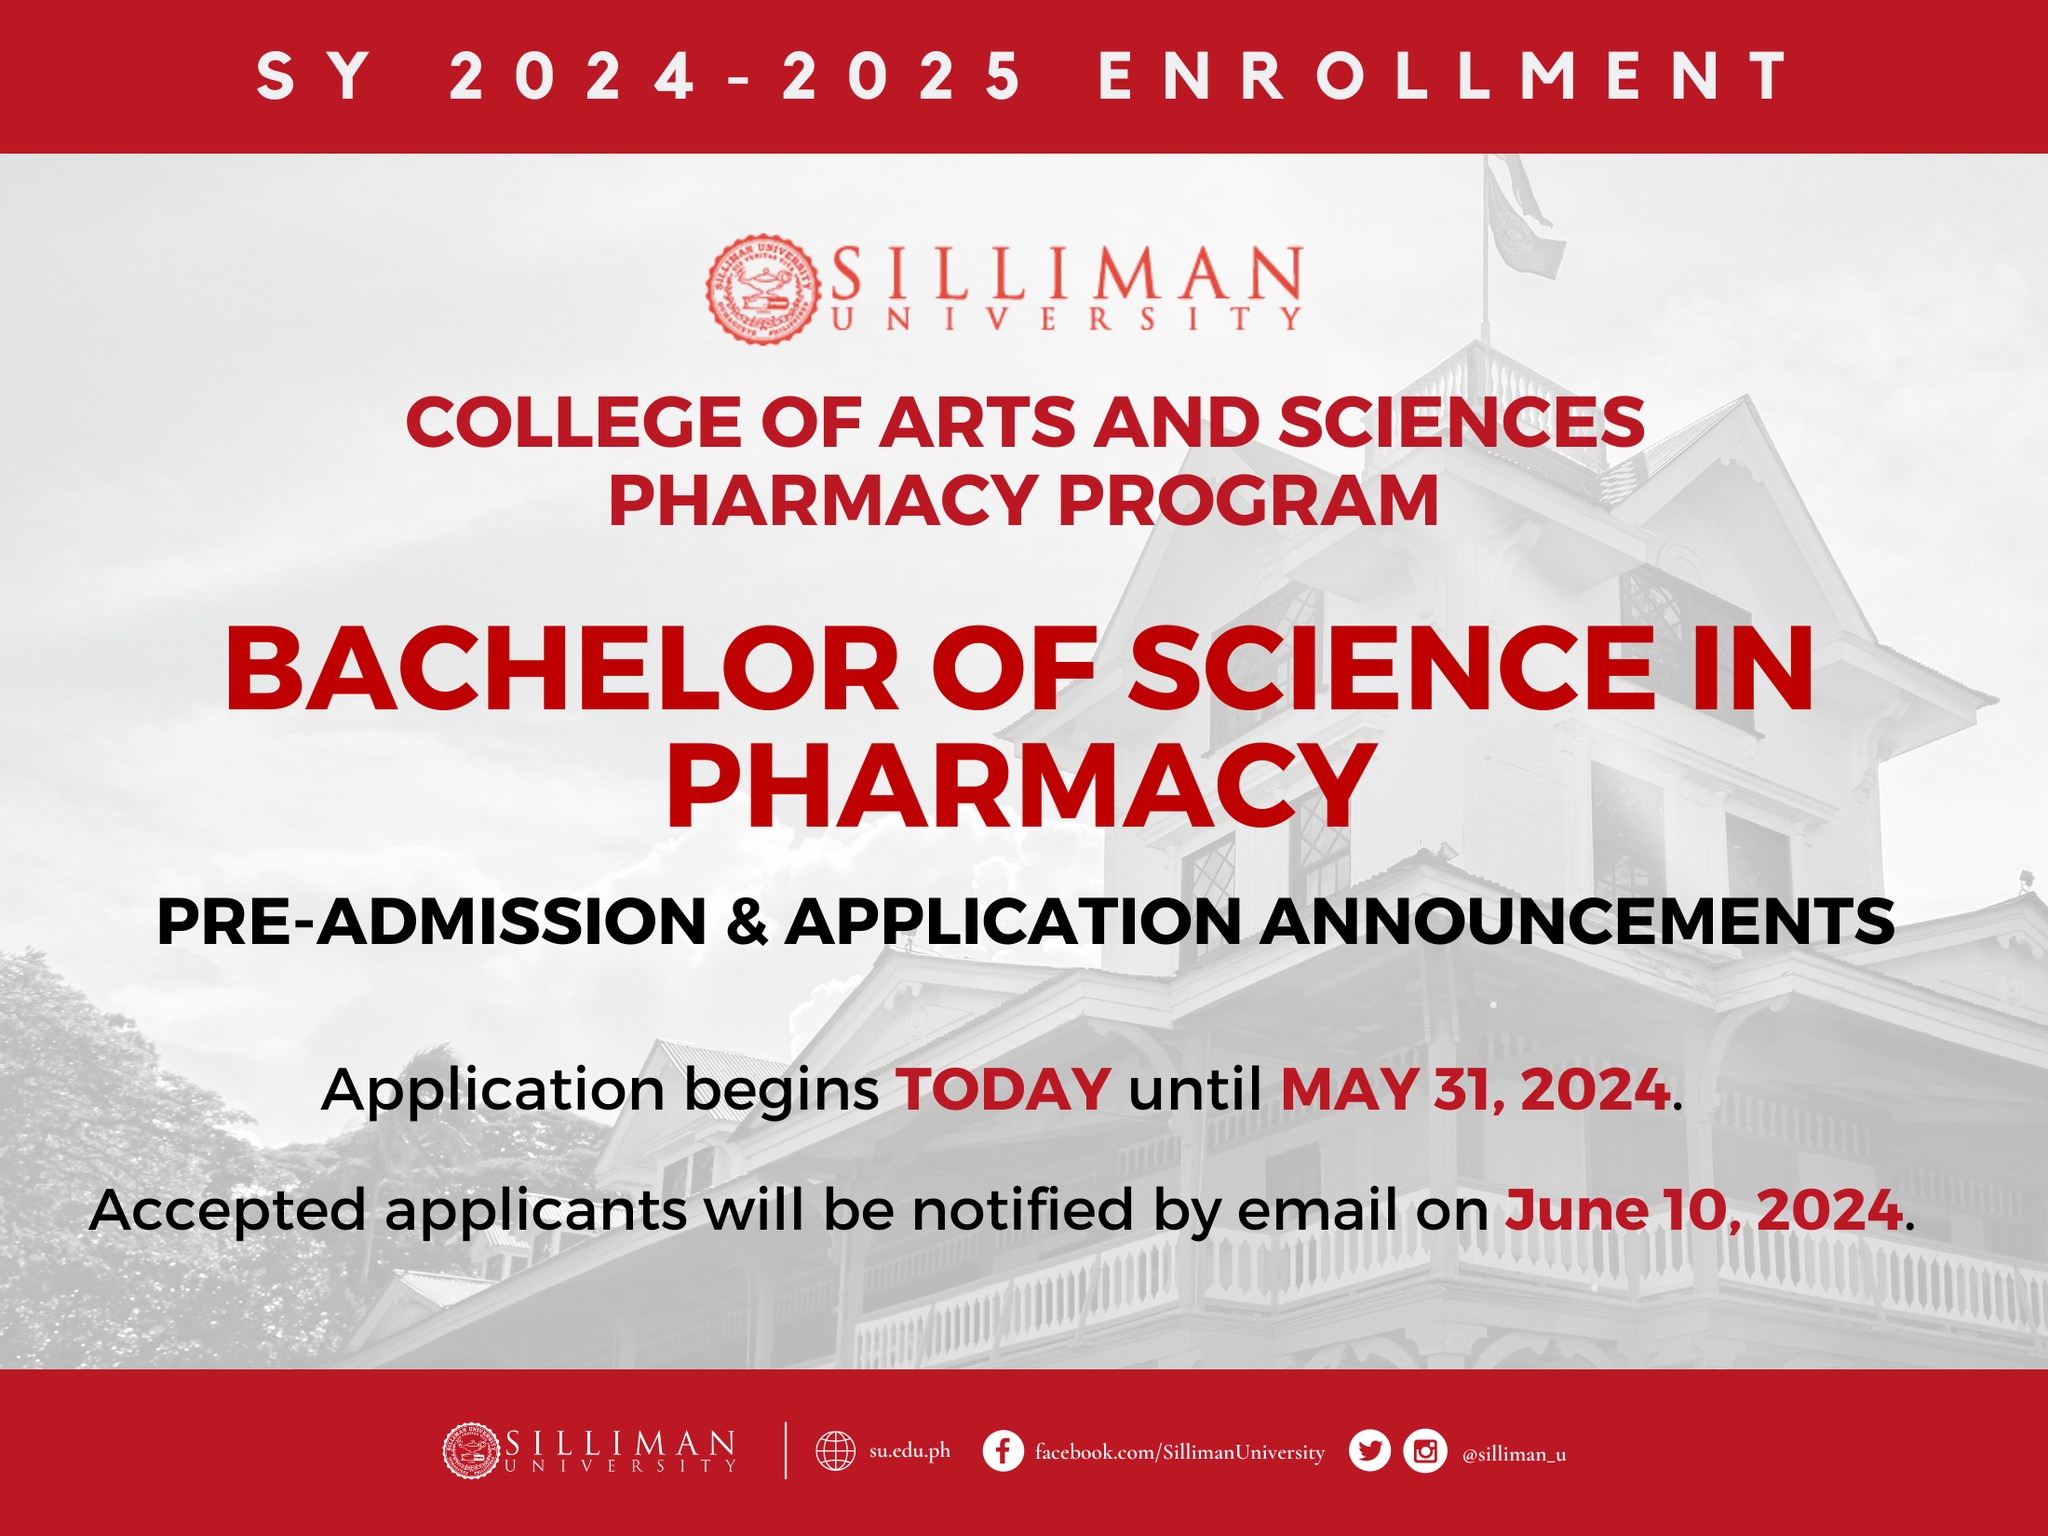 College of Arts and Sciences (CAS) – Pharmacy Program is NOW ACCEPTING APPLICATIONS for Bachelor of Science in Pharmacy